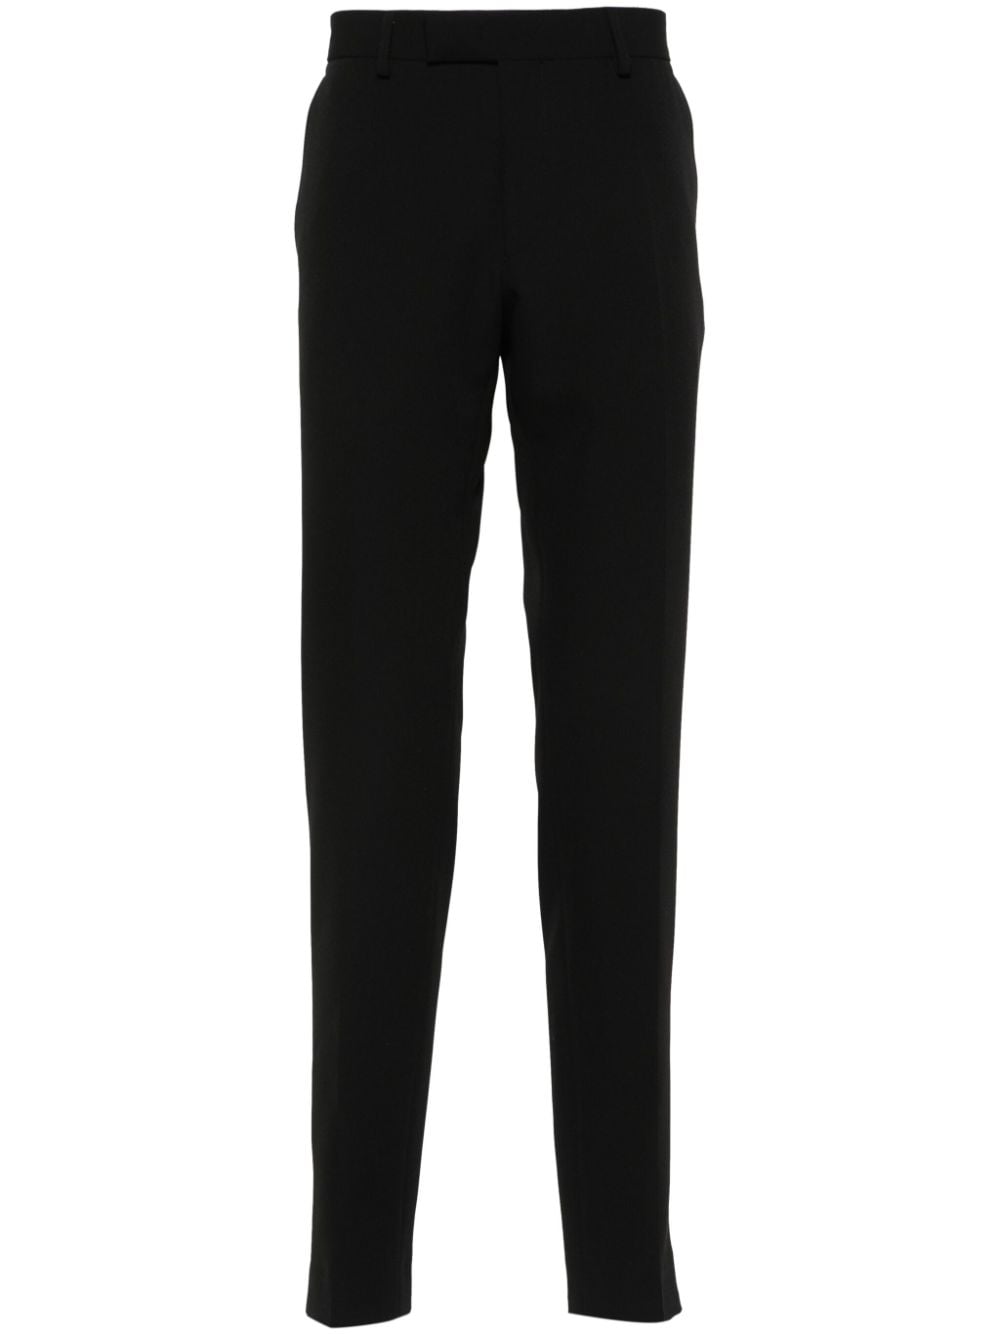 Image 1 of Karl Lagerfeld slim-cut tailored trousers